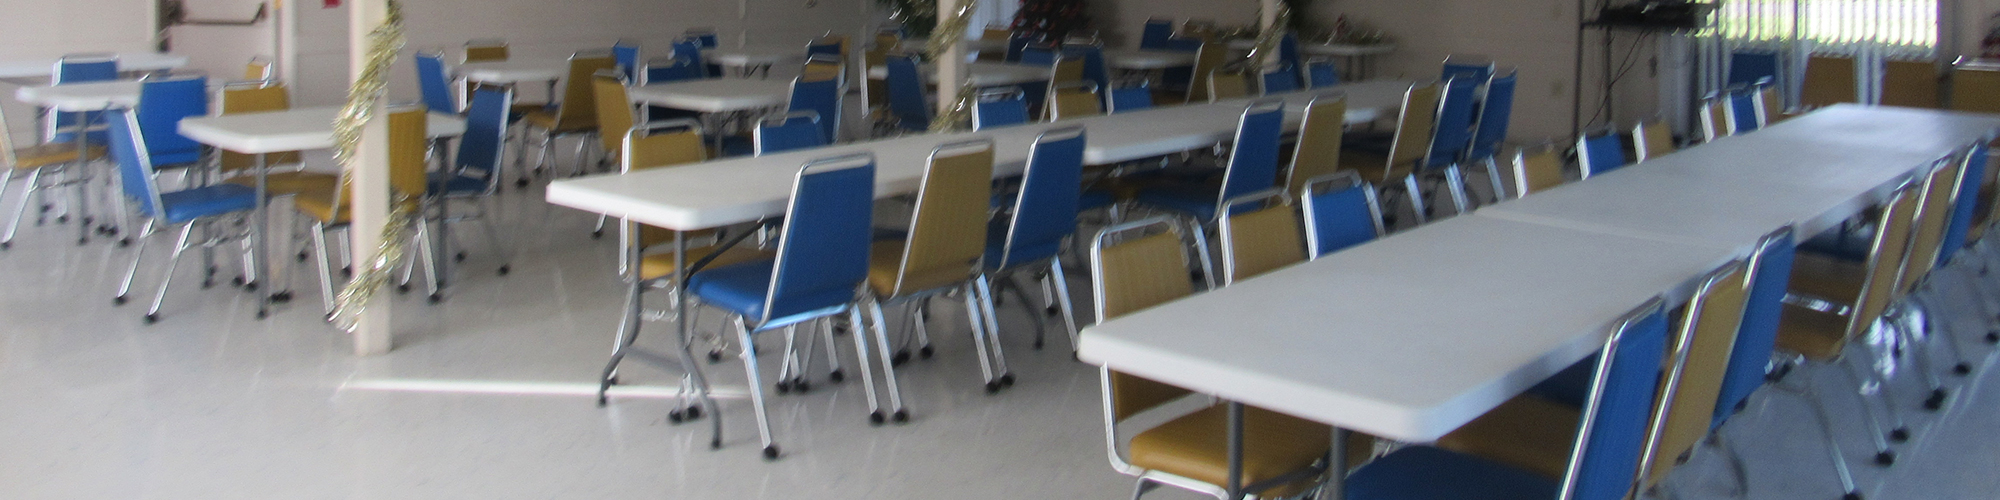 Rows of Chairs with Glides around Tables